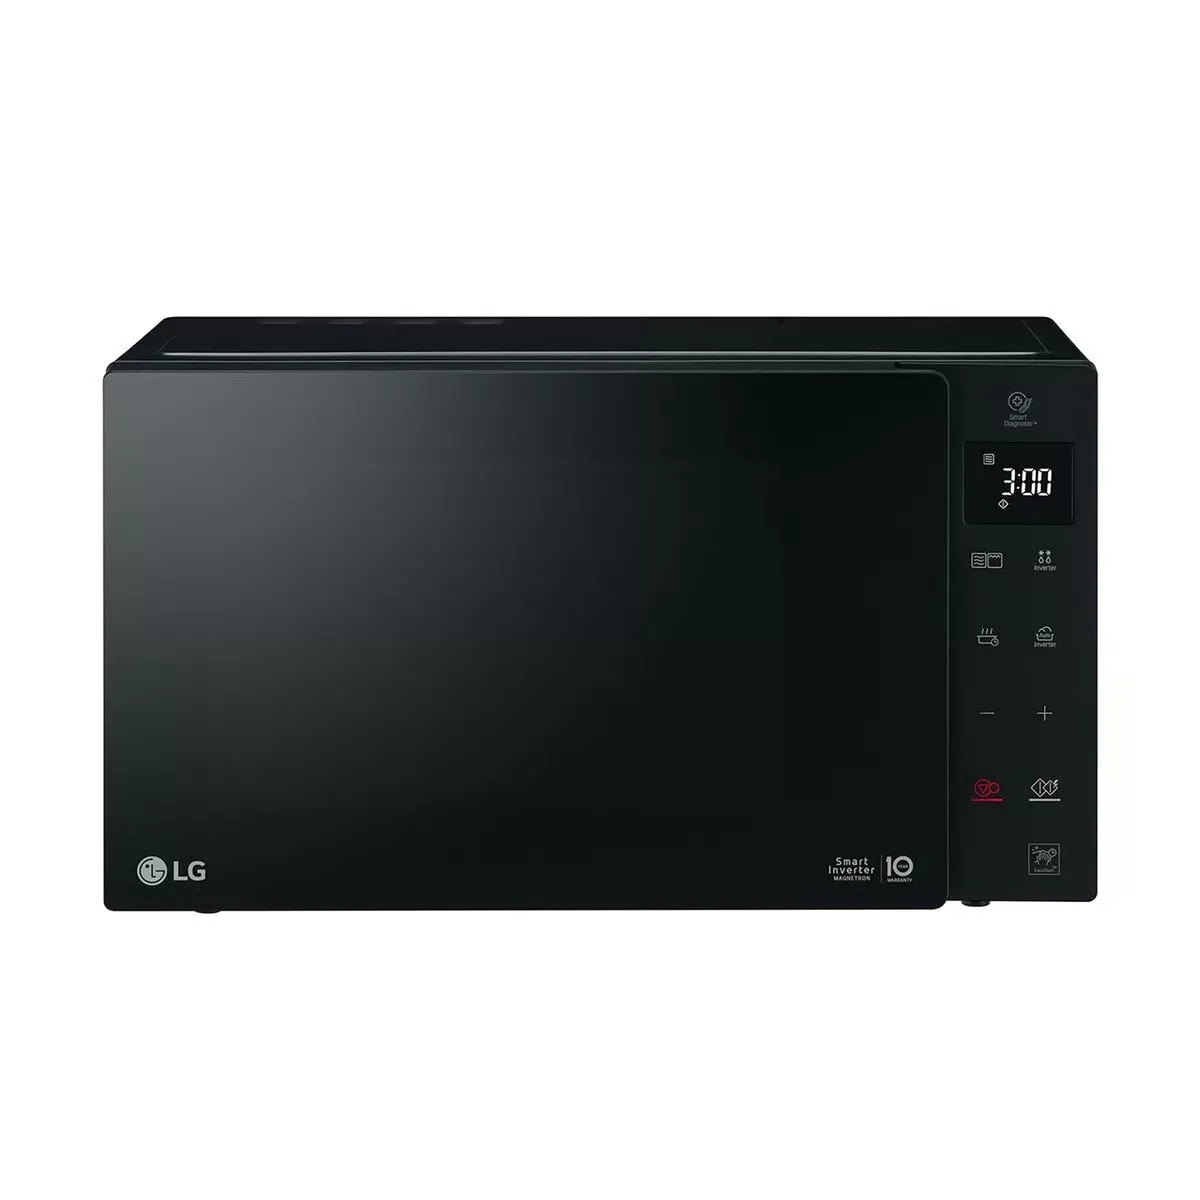 LG 25 Liter Microwave Oven With Grill Smart Inverter 1700 Watts Color Black Model MH6535GIS | 1 Year Warranty.